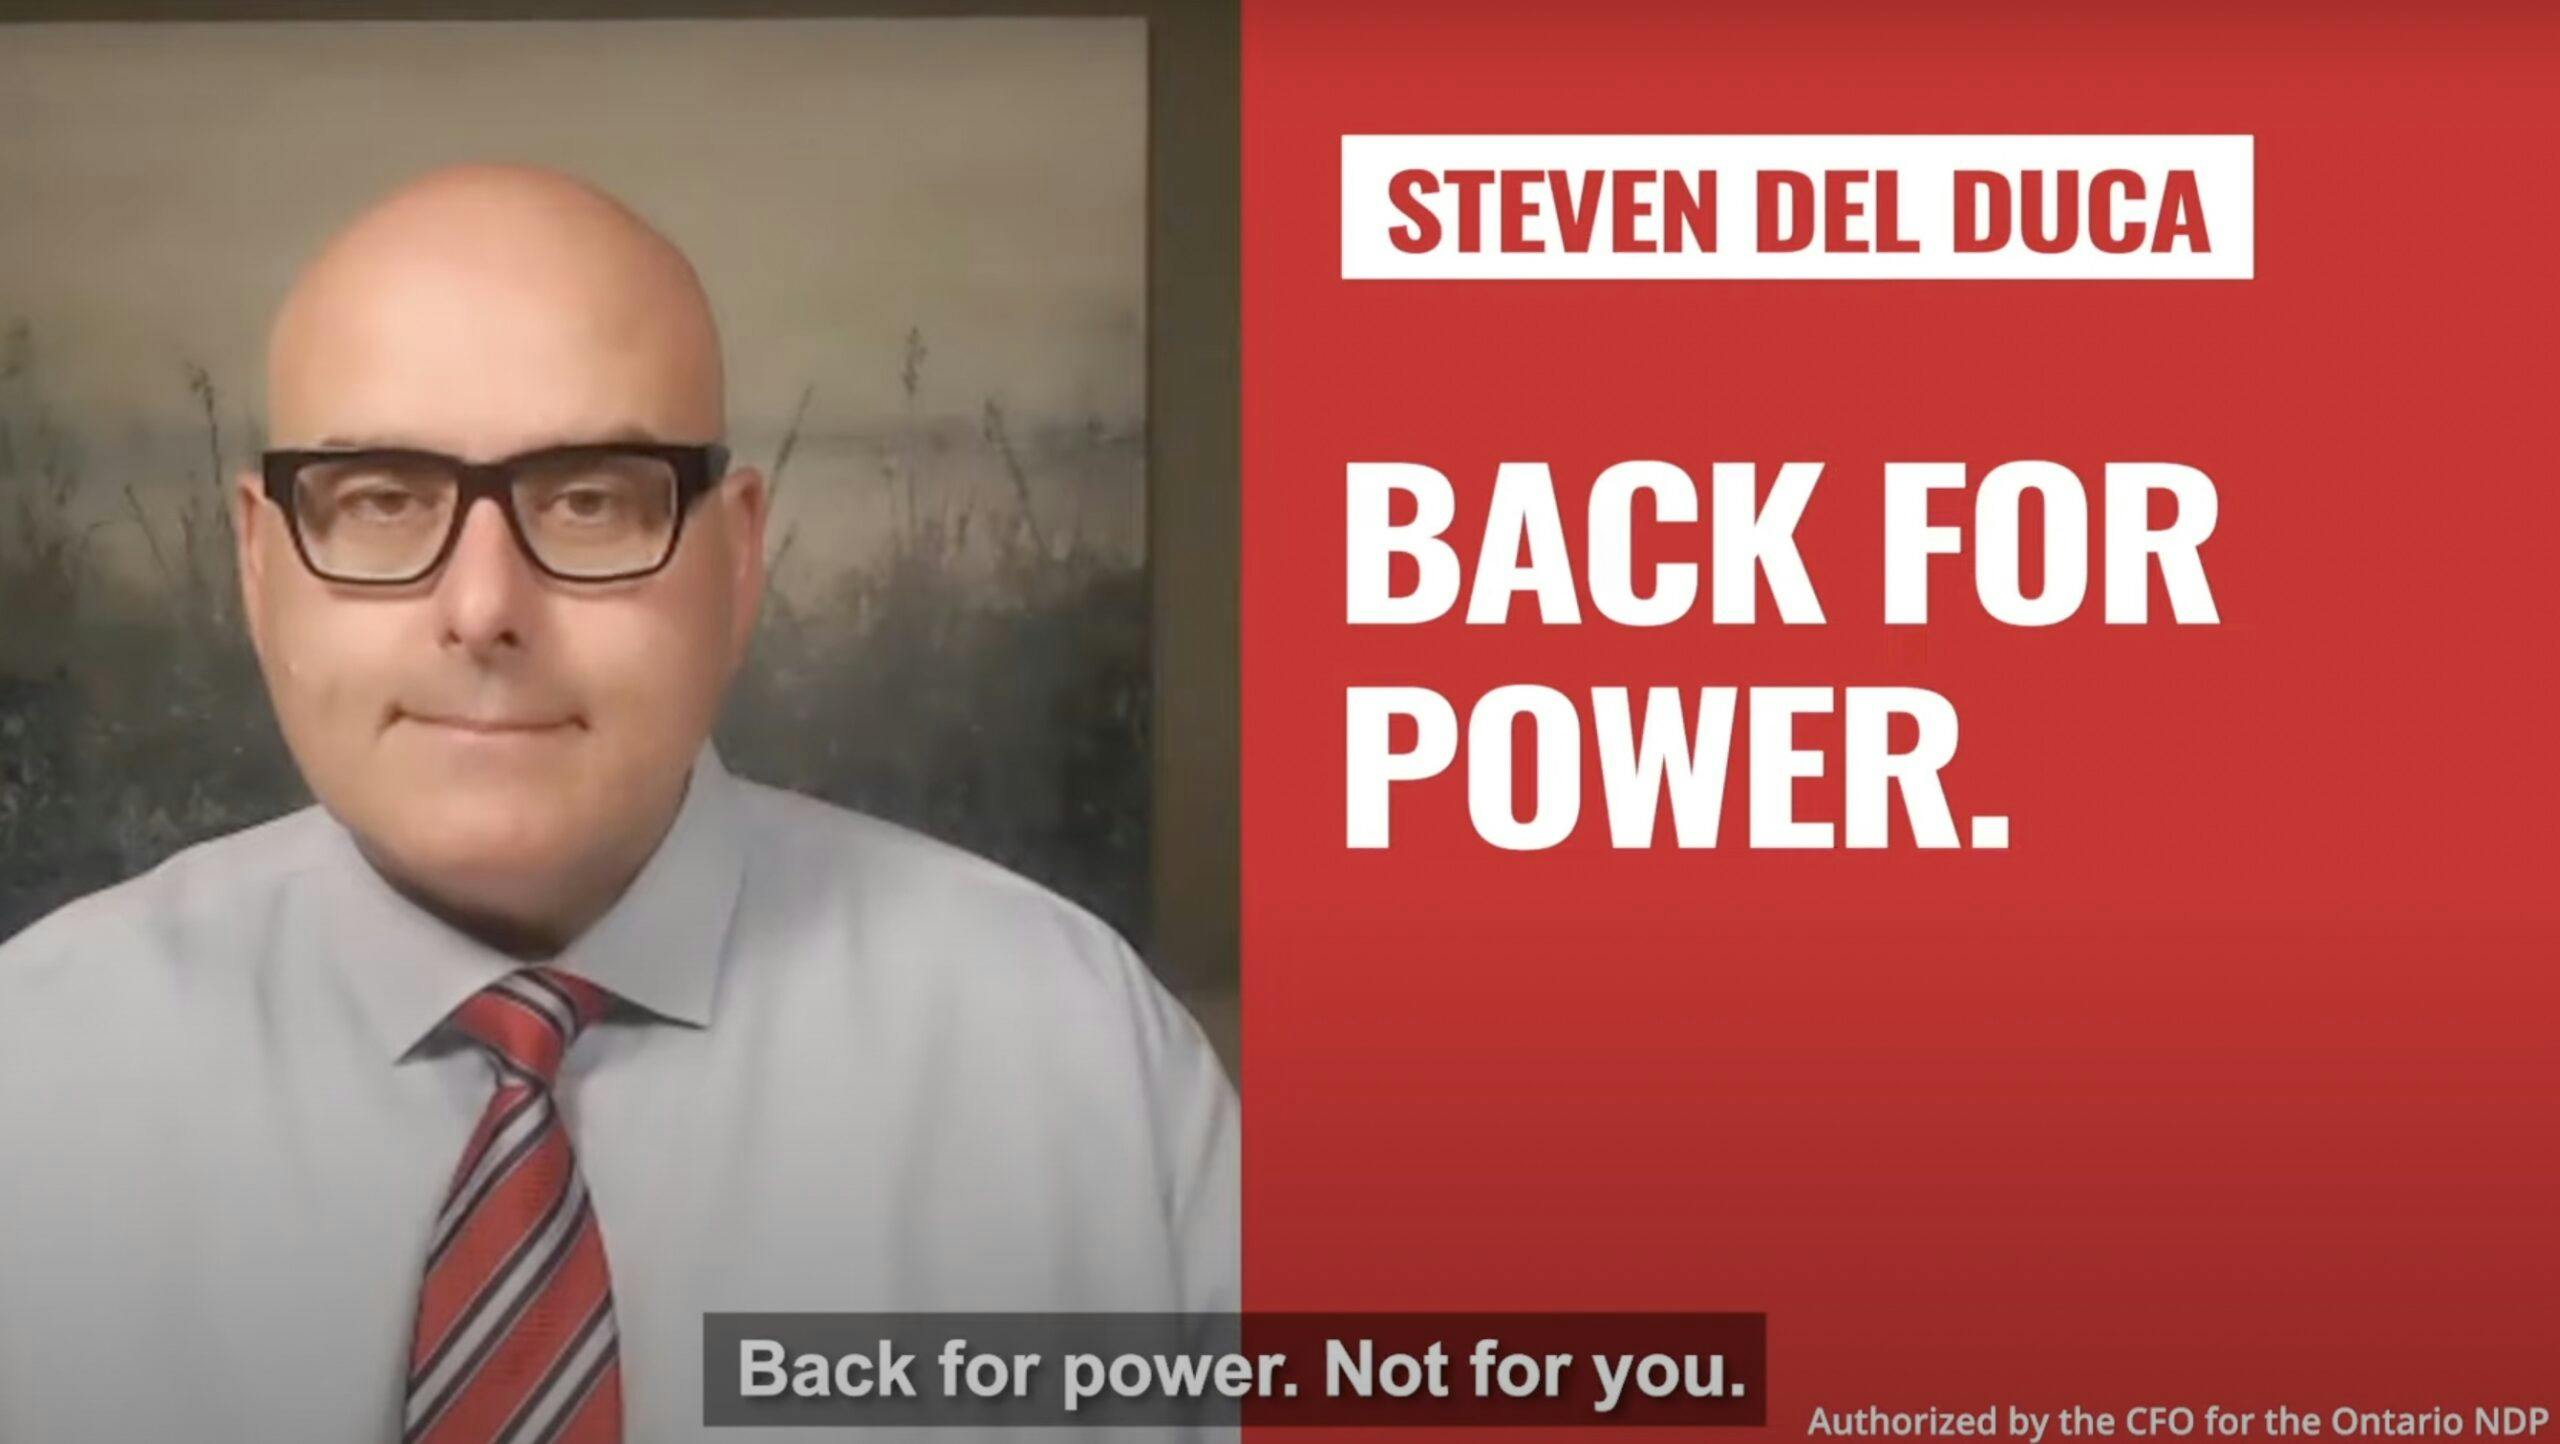 Ontario NDP releases attack ad defining Liberal leader as ‘back for power, not for you’